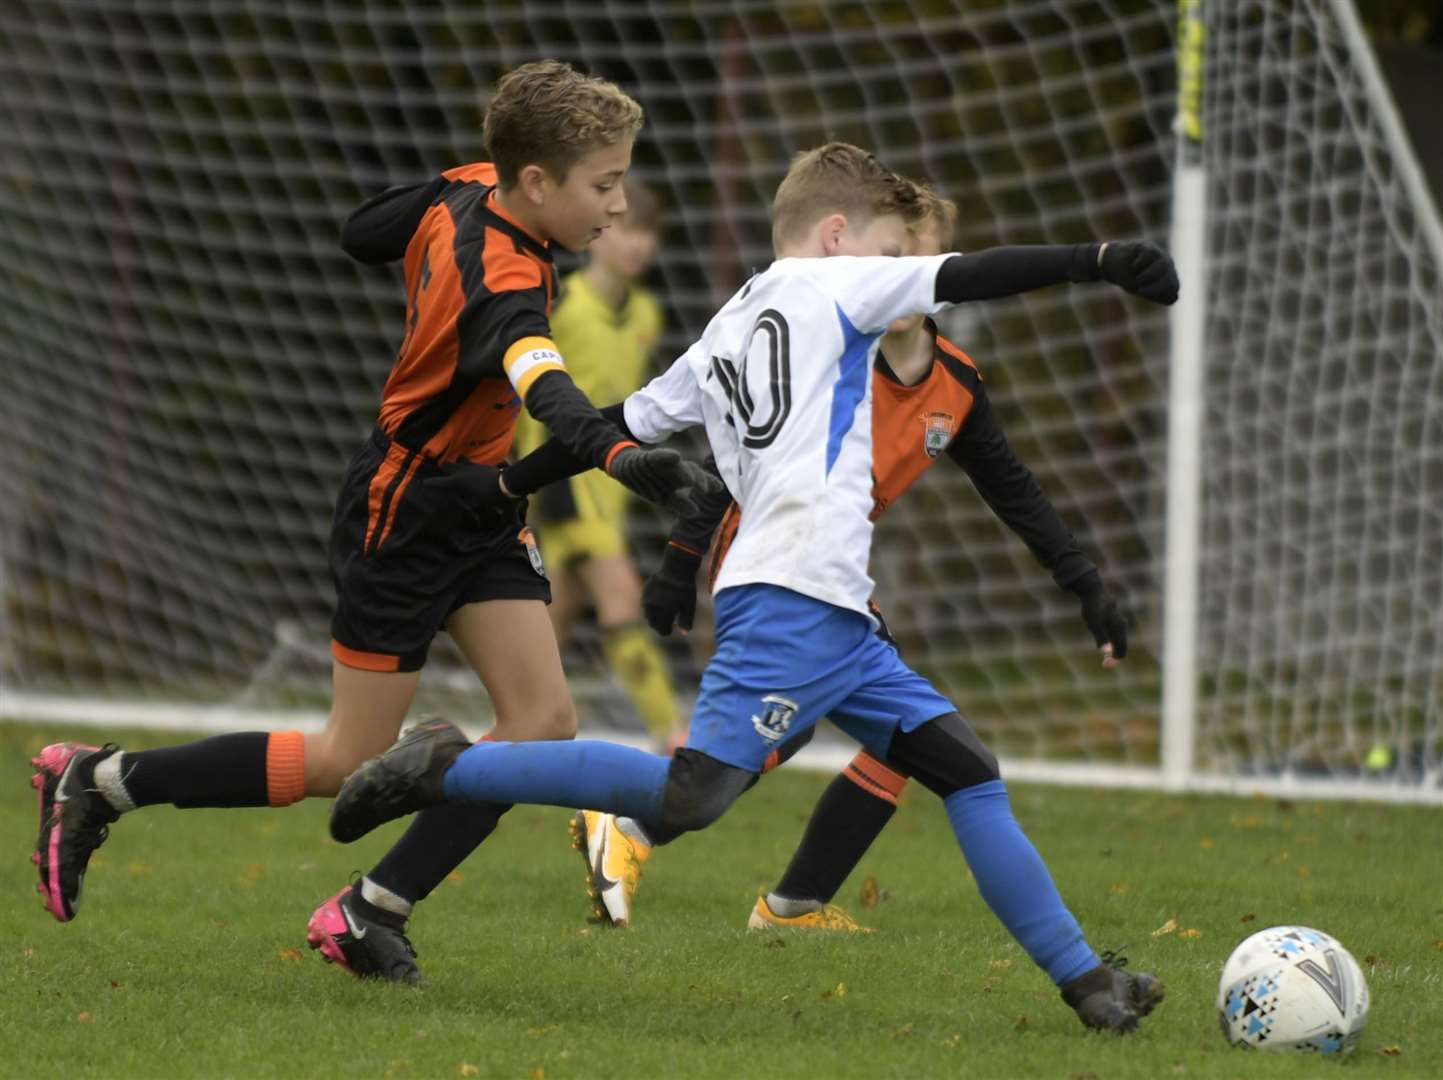 Medway United South under-11s (white) are closed down by Lordswood Youth under-11s. Picture: Barry Goodwin (42845076)